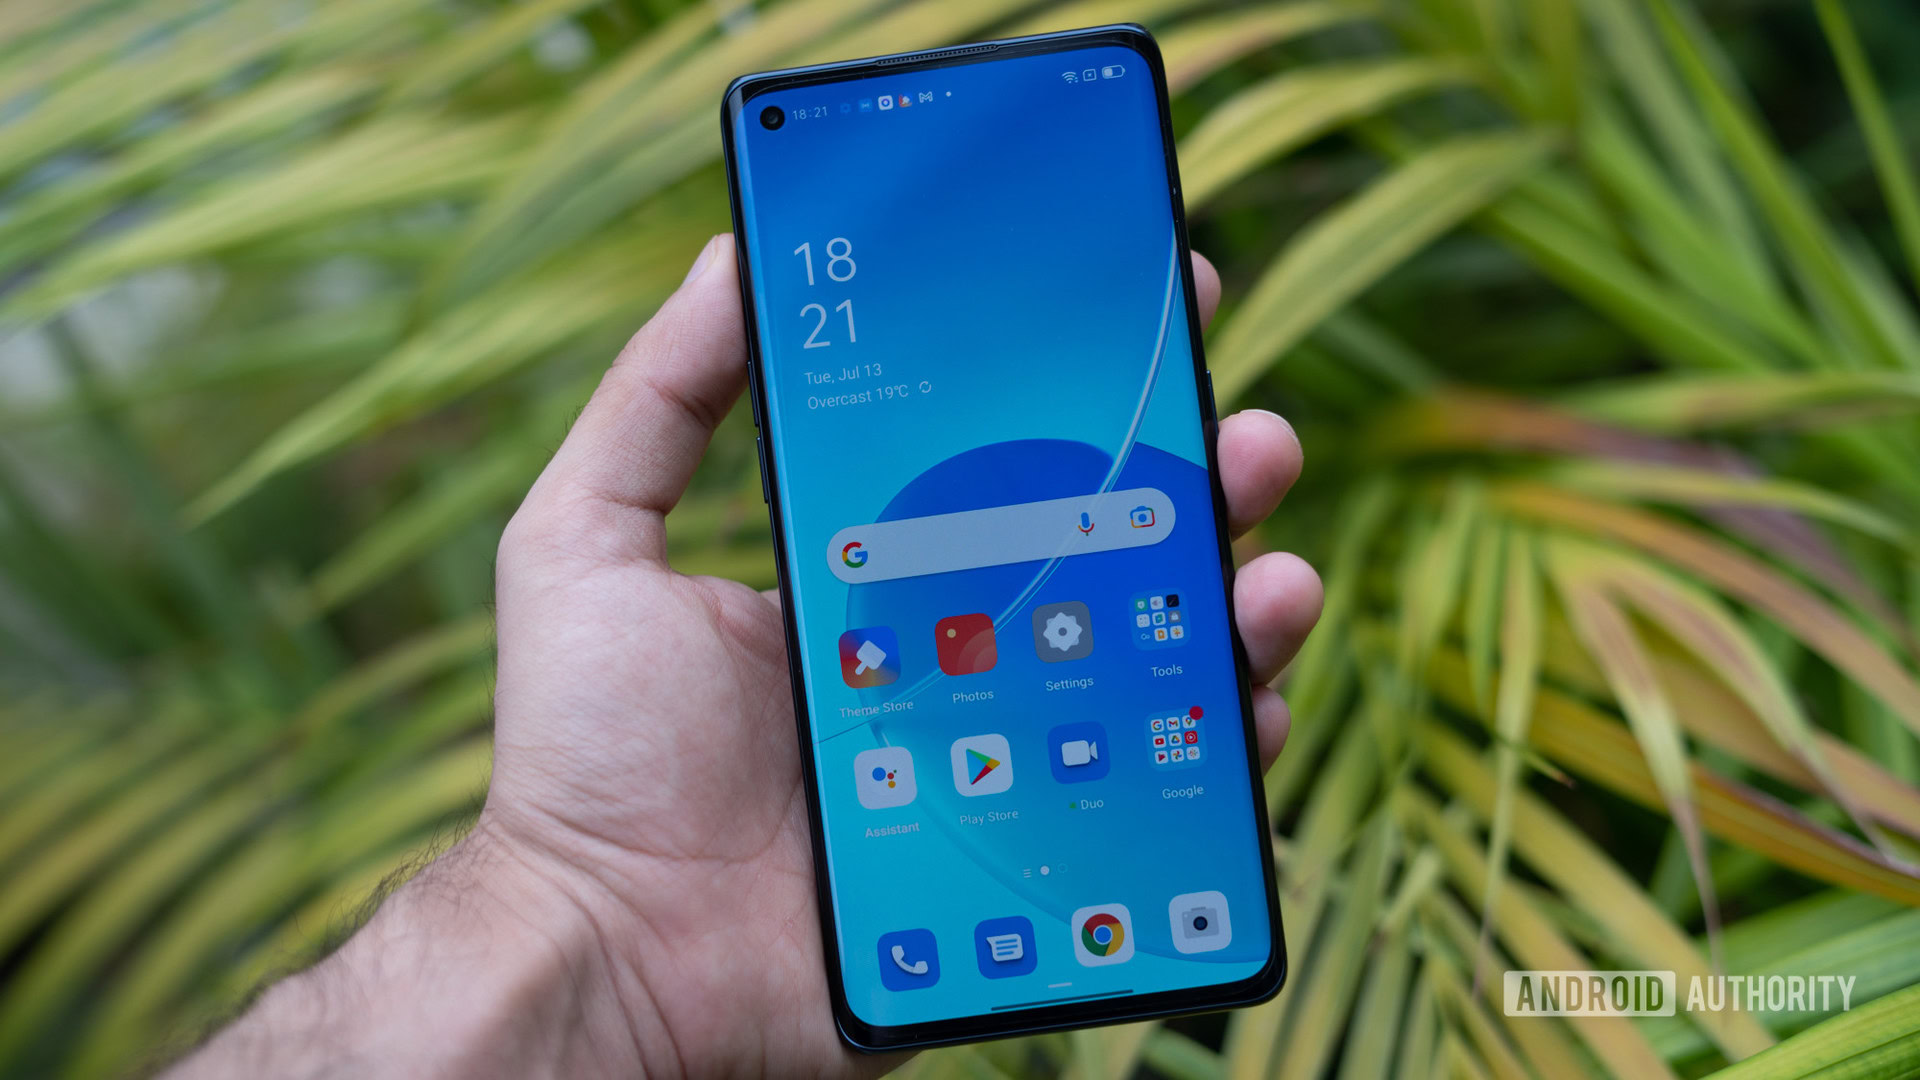 The Oppo Reno 6 Pro phone in hand showing the screen.